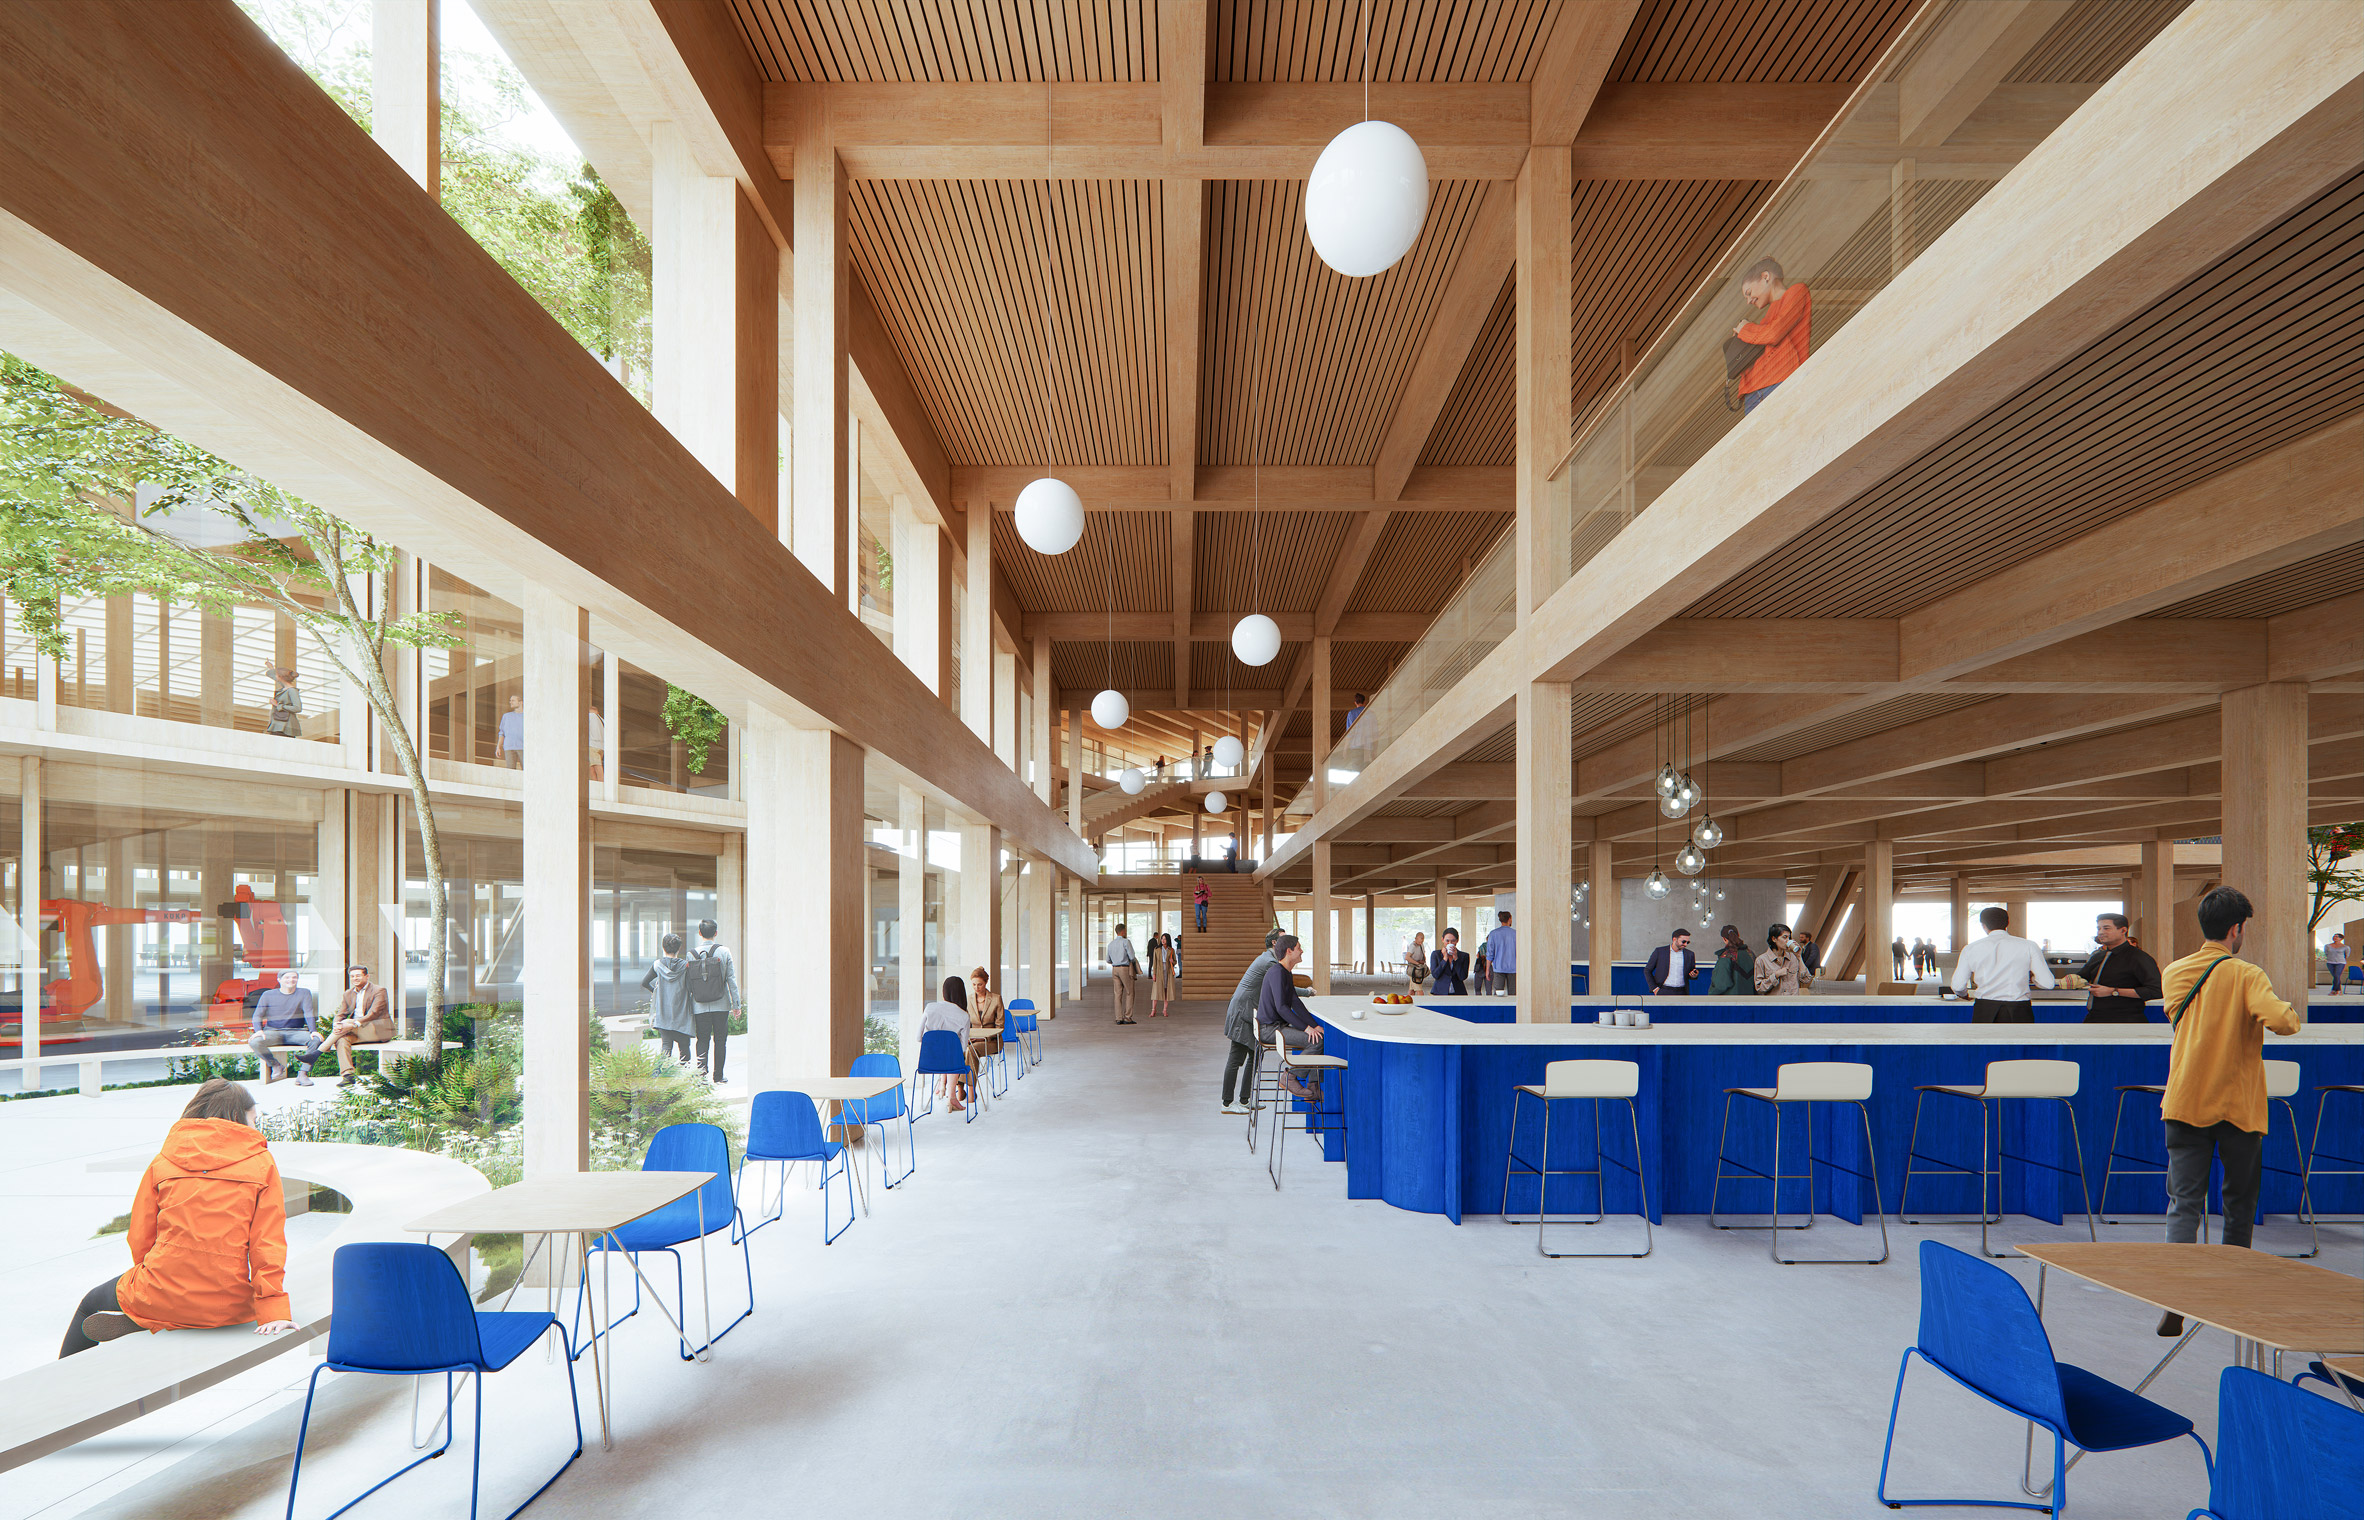 Multiple levels in timber building with seating and floor-to-ceiling windows